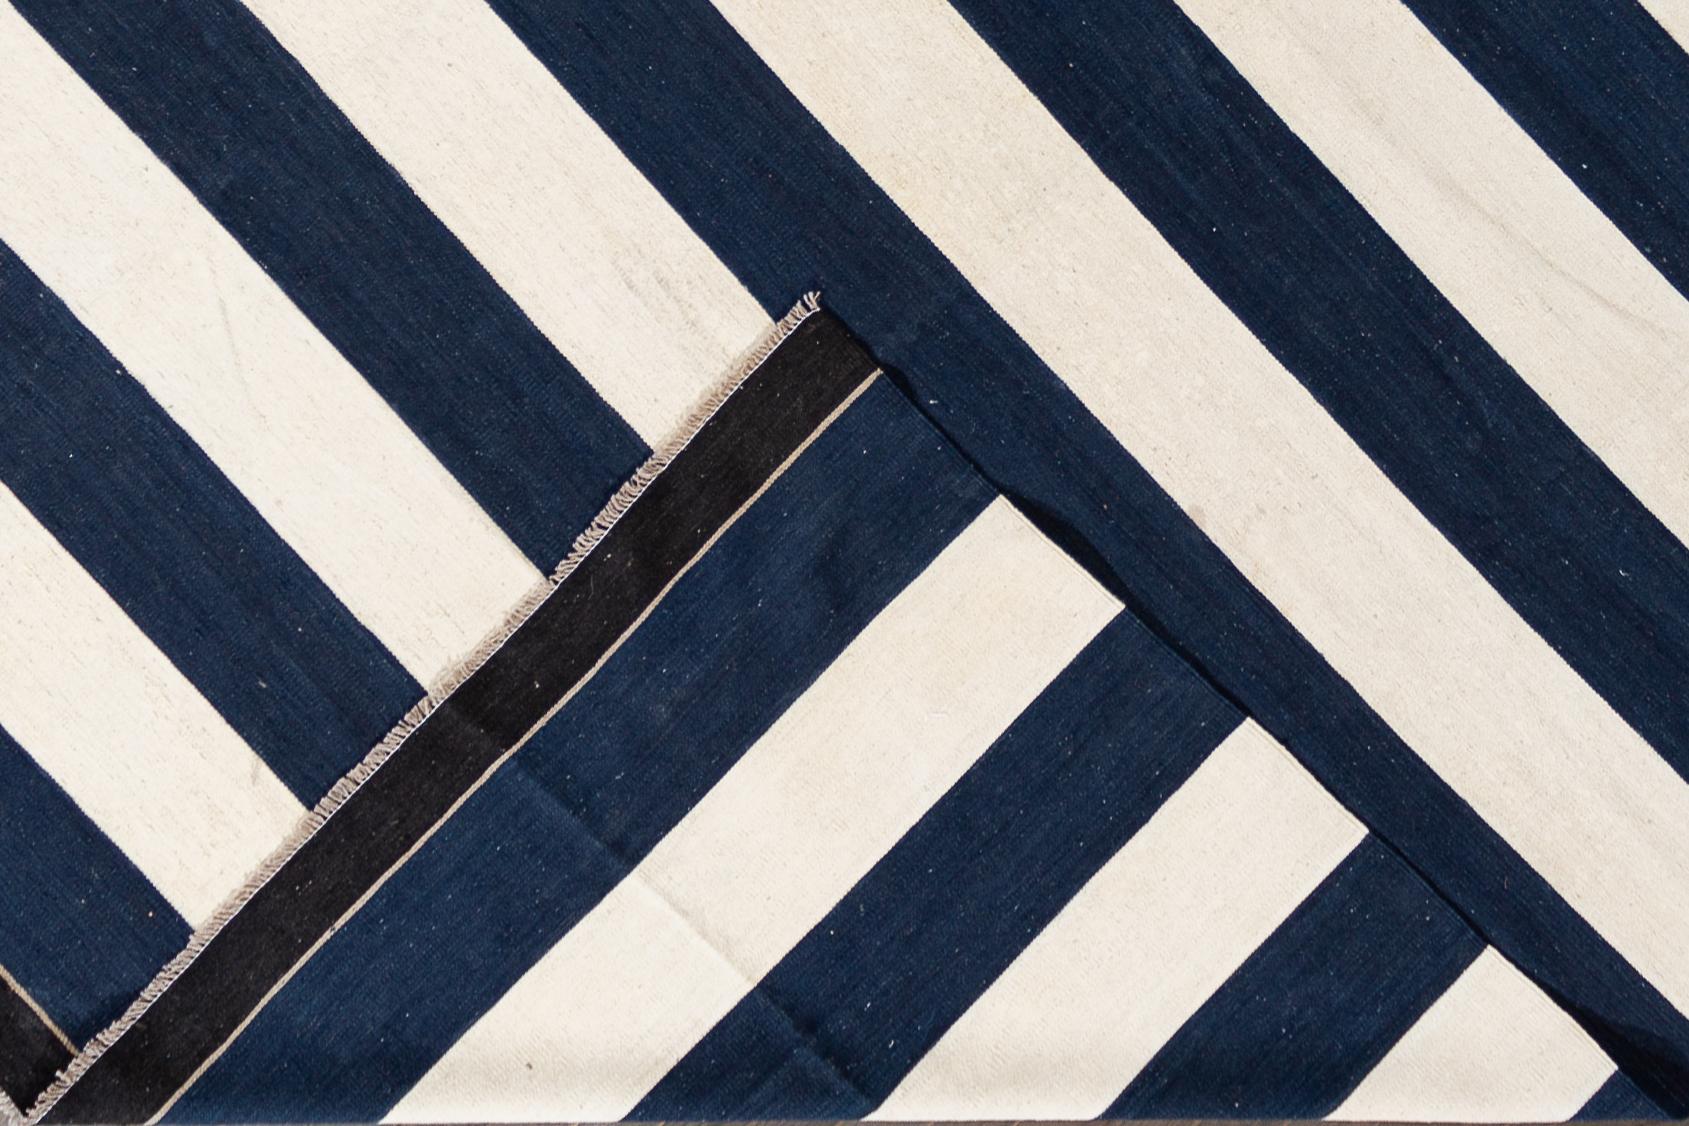 Beautiful 21st century contemporary Kilim rug, handwoven wool in an all-over blue and white striped design.

This rug measures: 9' 9